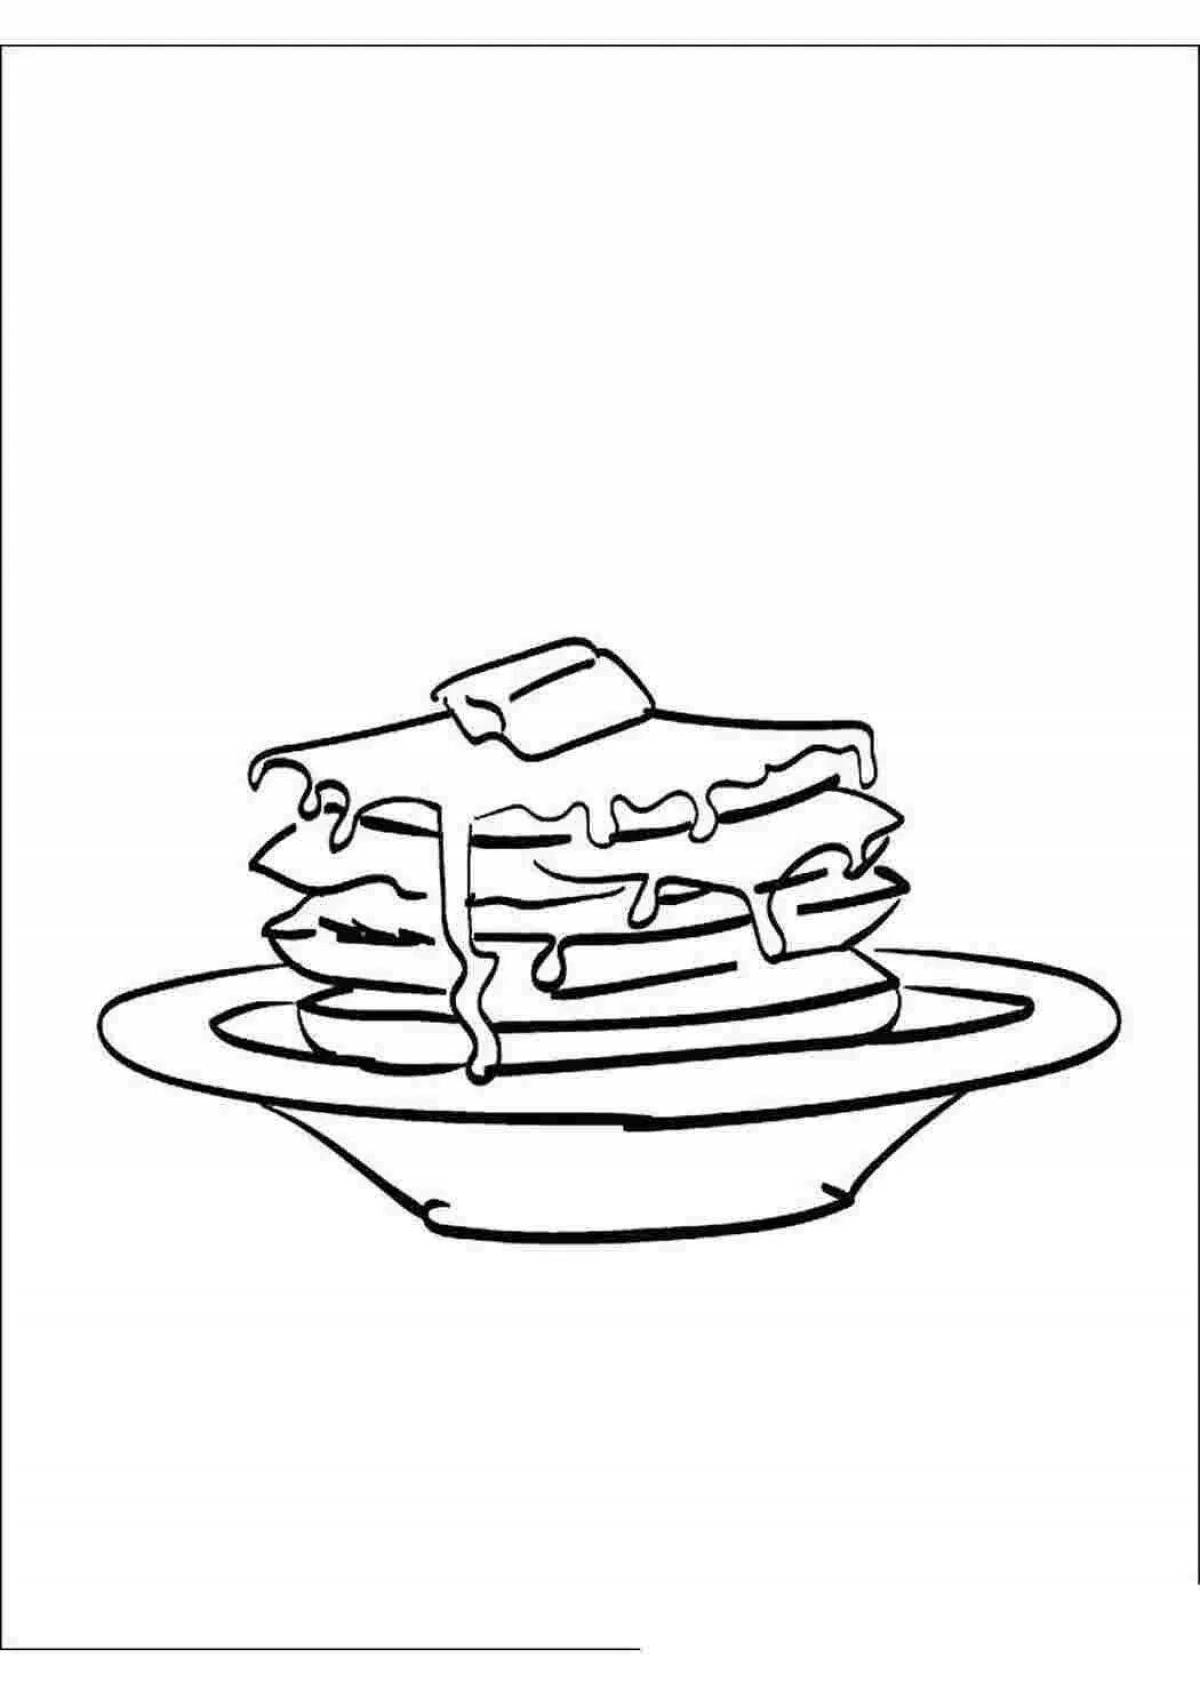 Gorgeous pancakes coloring pages for kids